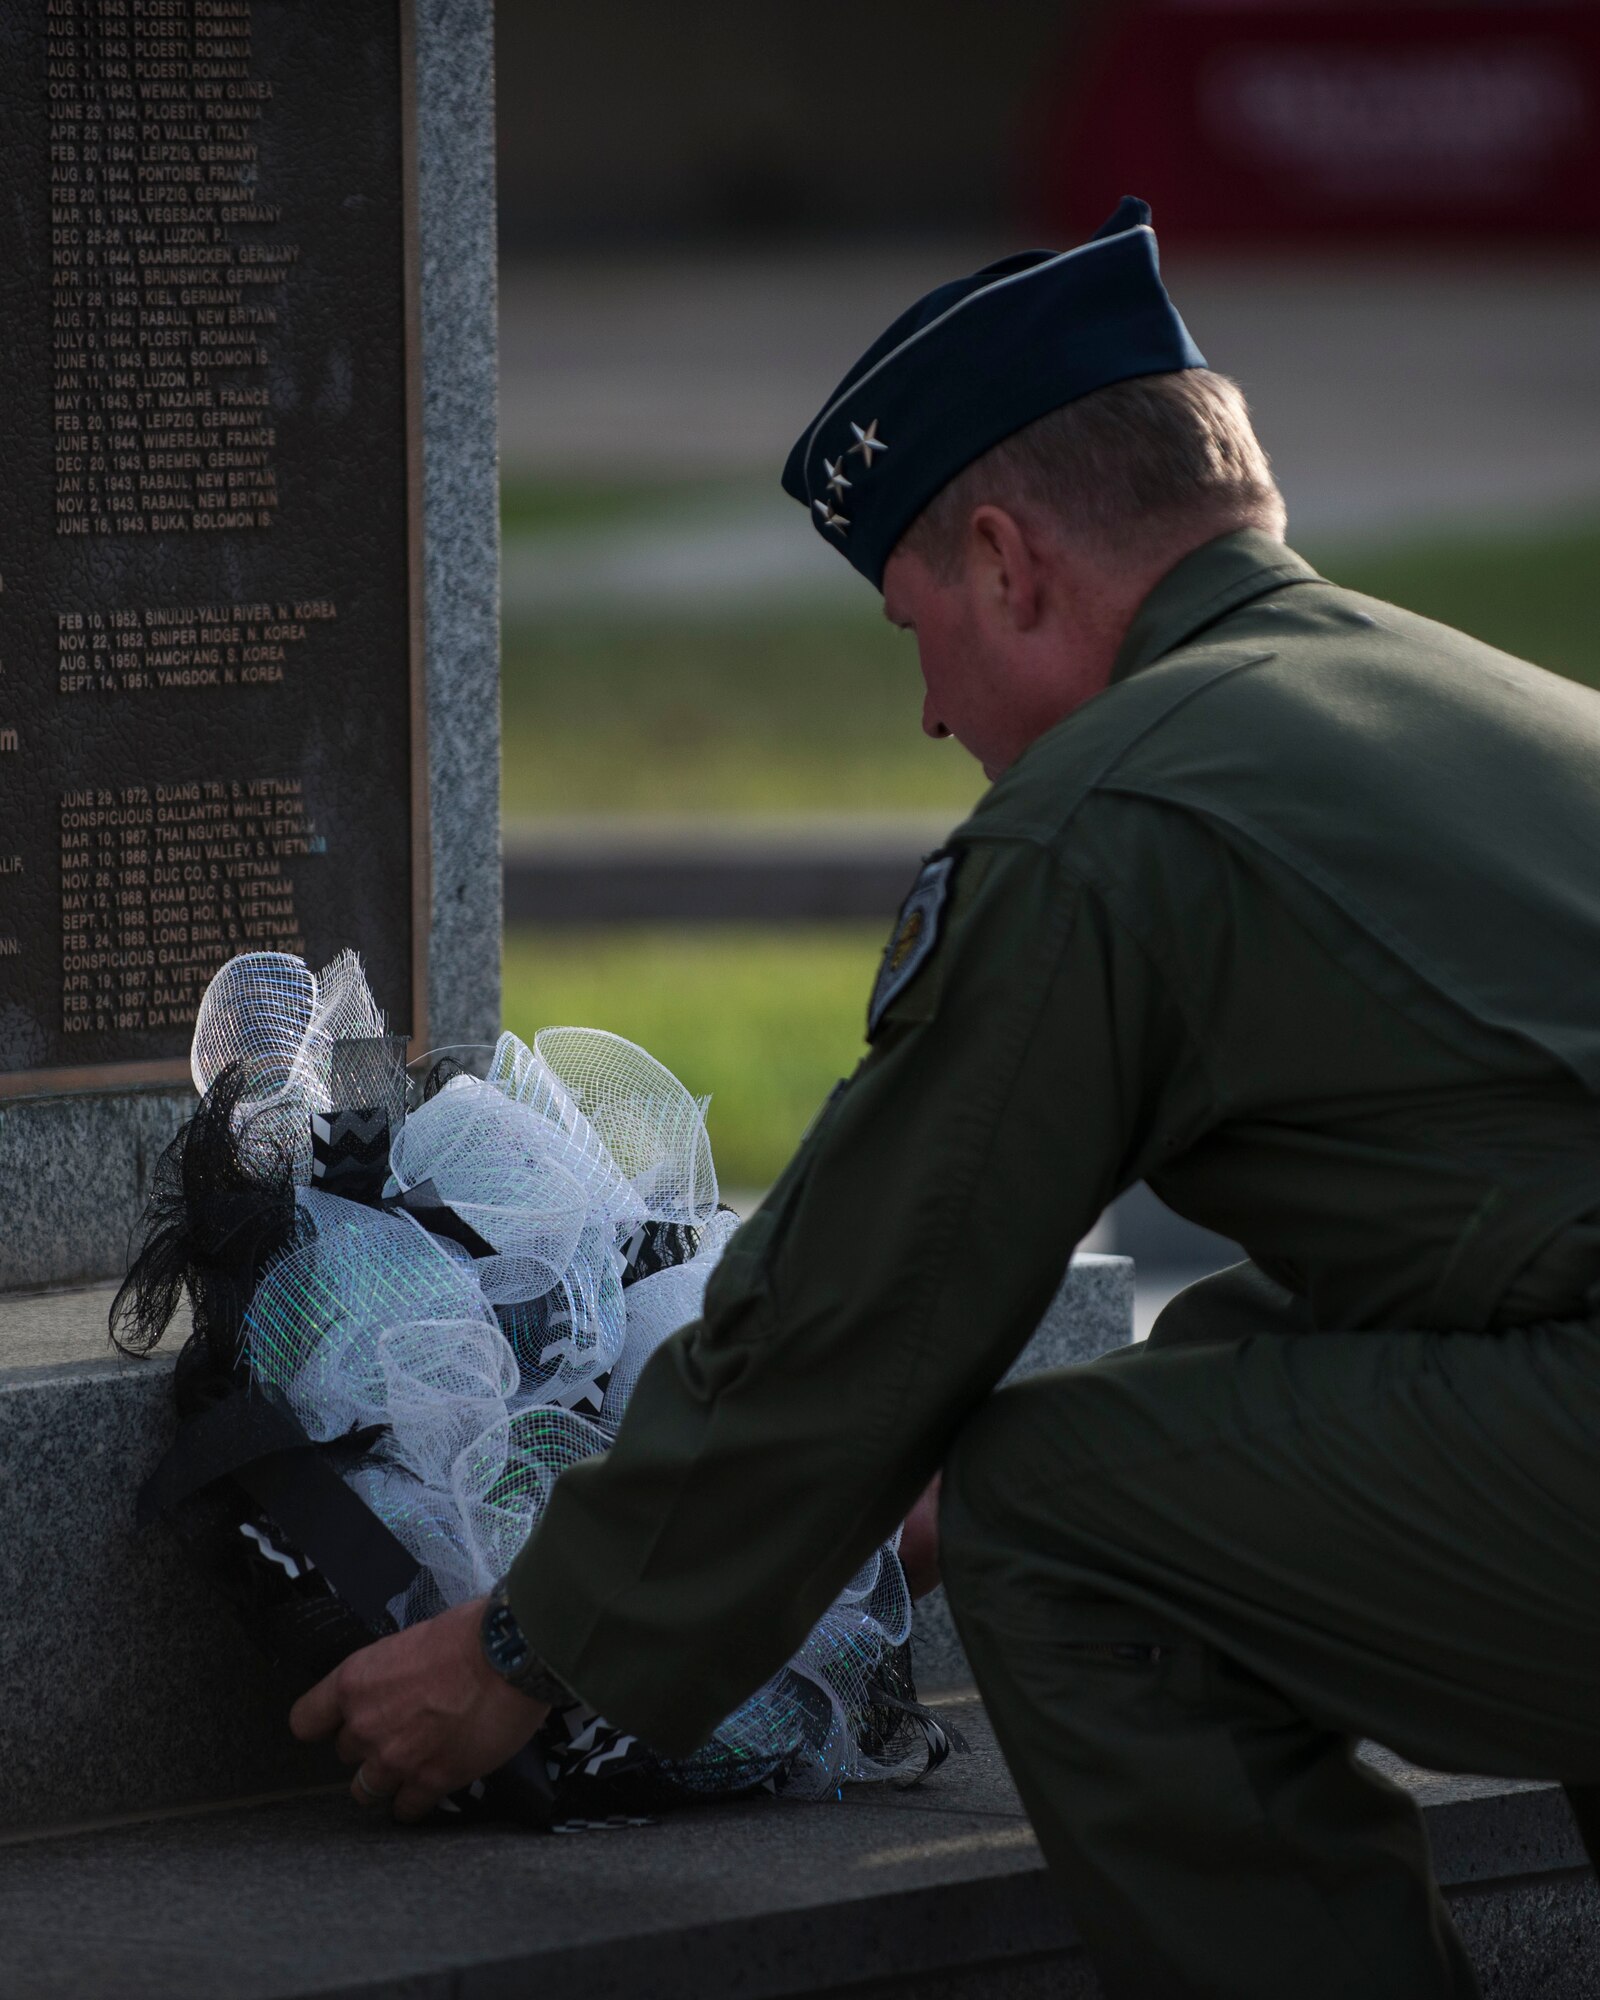 U.S. Air Force Lt. General Thomas Bergesen, 7th Air Force commander, lays a wreath during the closing ceremony of the POW/MIA Recognition Day at Kunsan Air Base, Republic of Korea, Sept. 15, 2017. The day was established by an Act of Congress, by the passage of Section 1082 of the 1998 Defense Authorization Act and is one of six days that the POW/MIA Flag can be flown. (U.S. Air Force photo by Staff Sgt. Victoria H. Taylor)